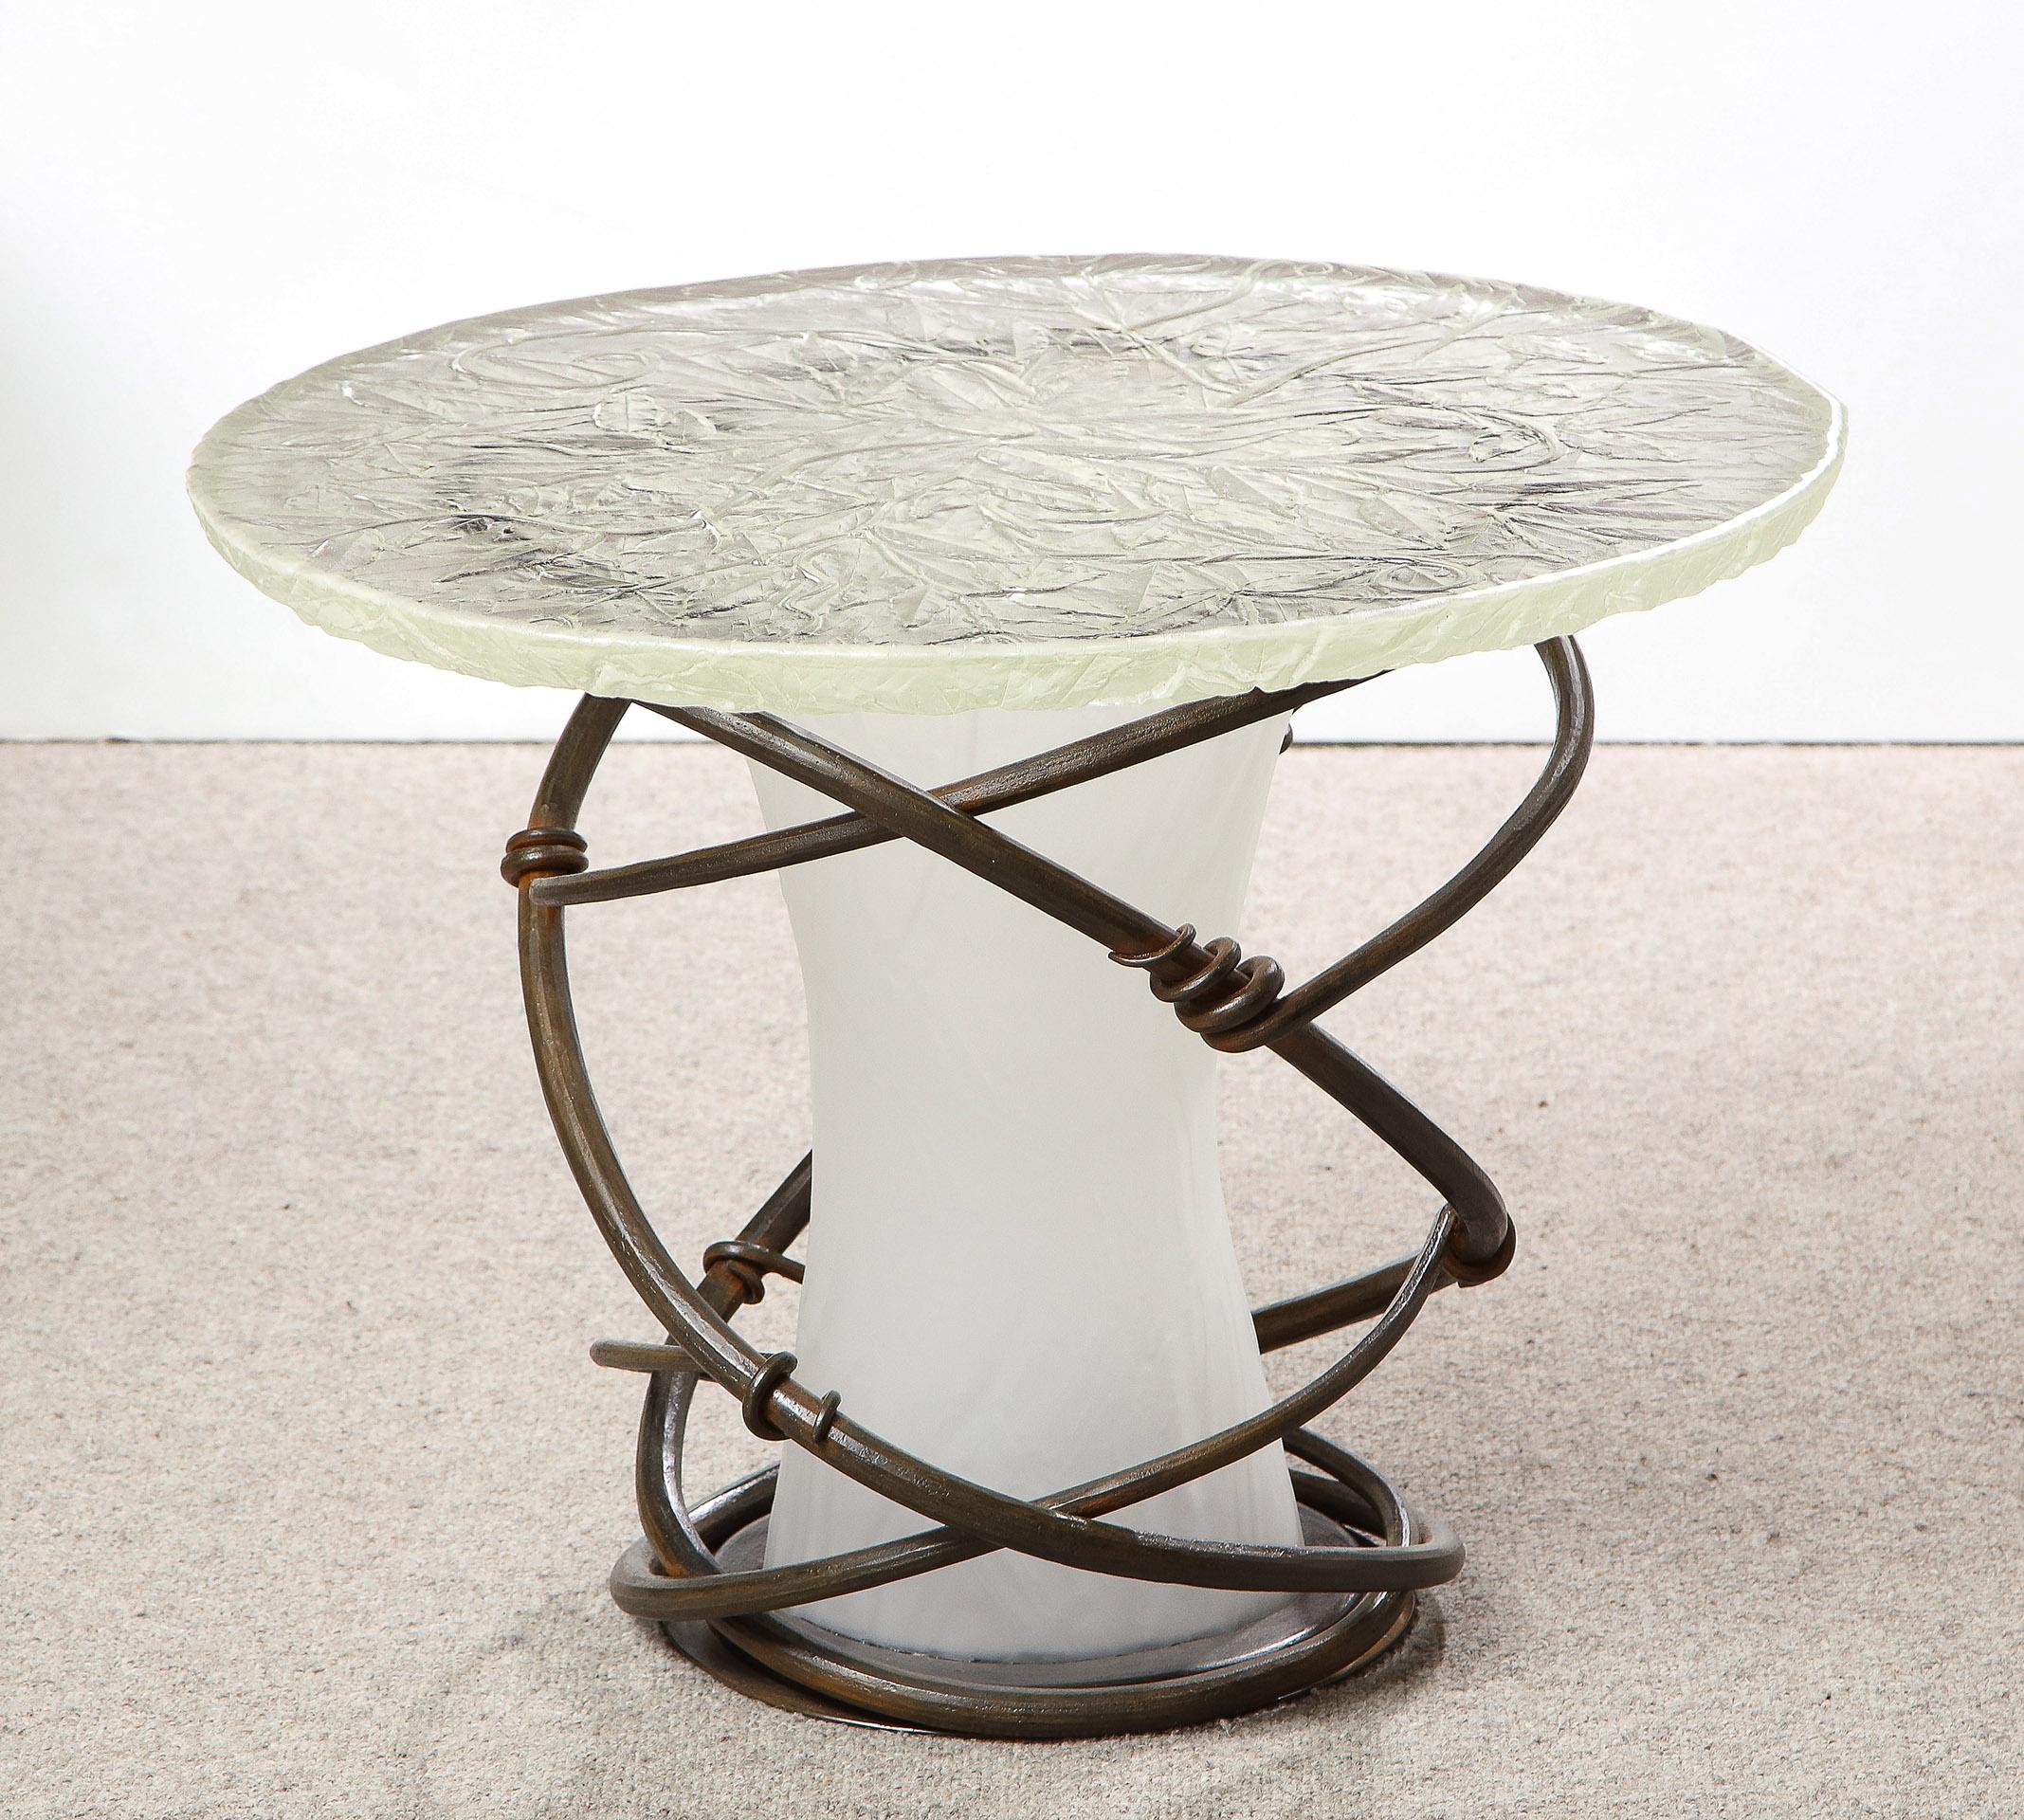 Cast Iron and etched floral glass end table.
Signed on edge of glass.